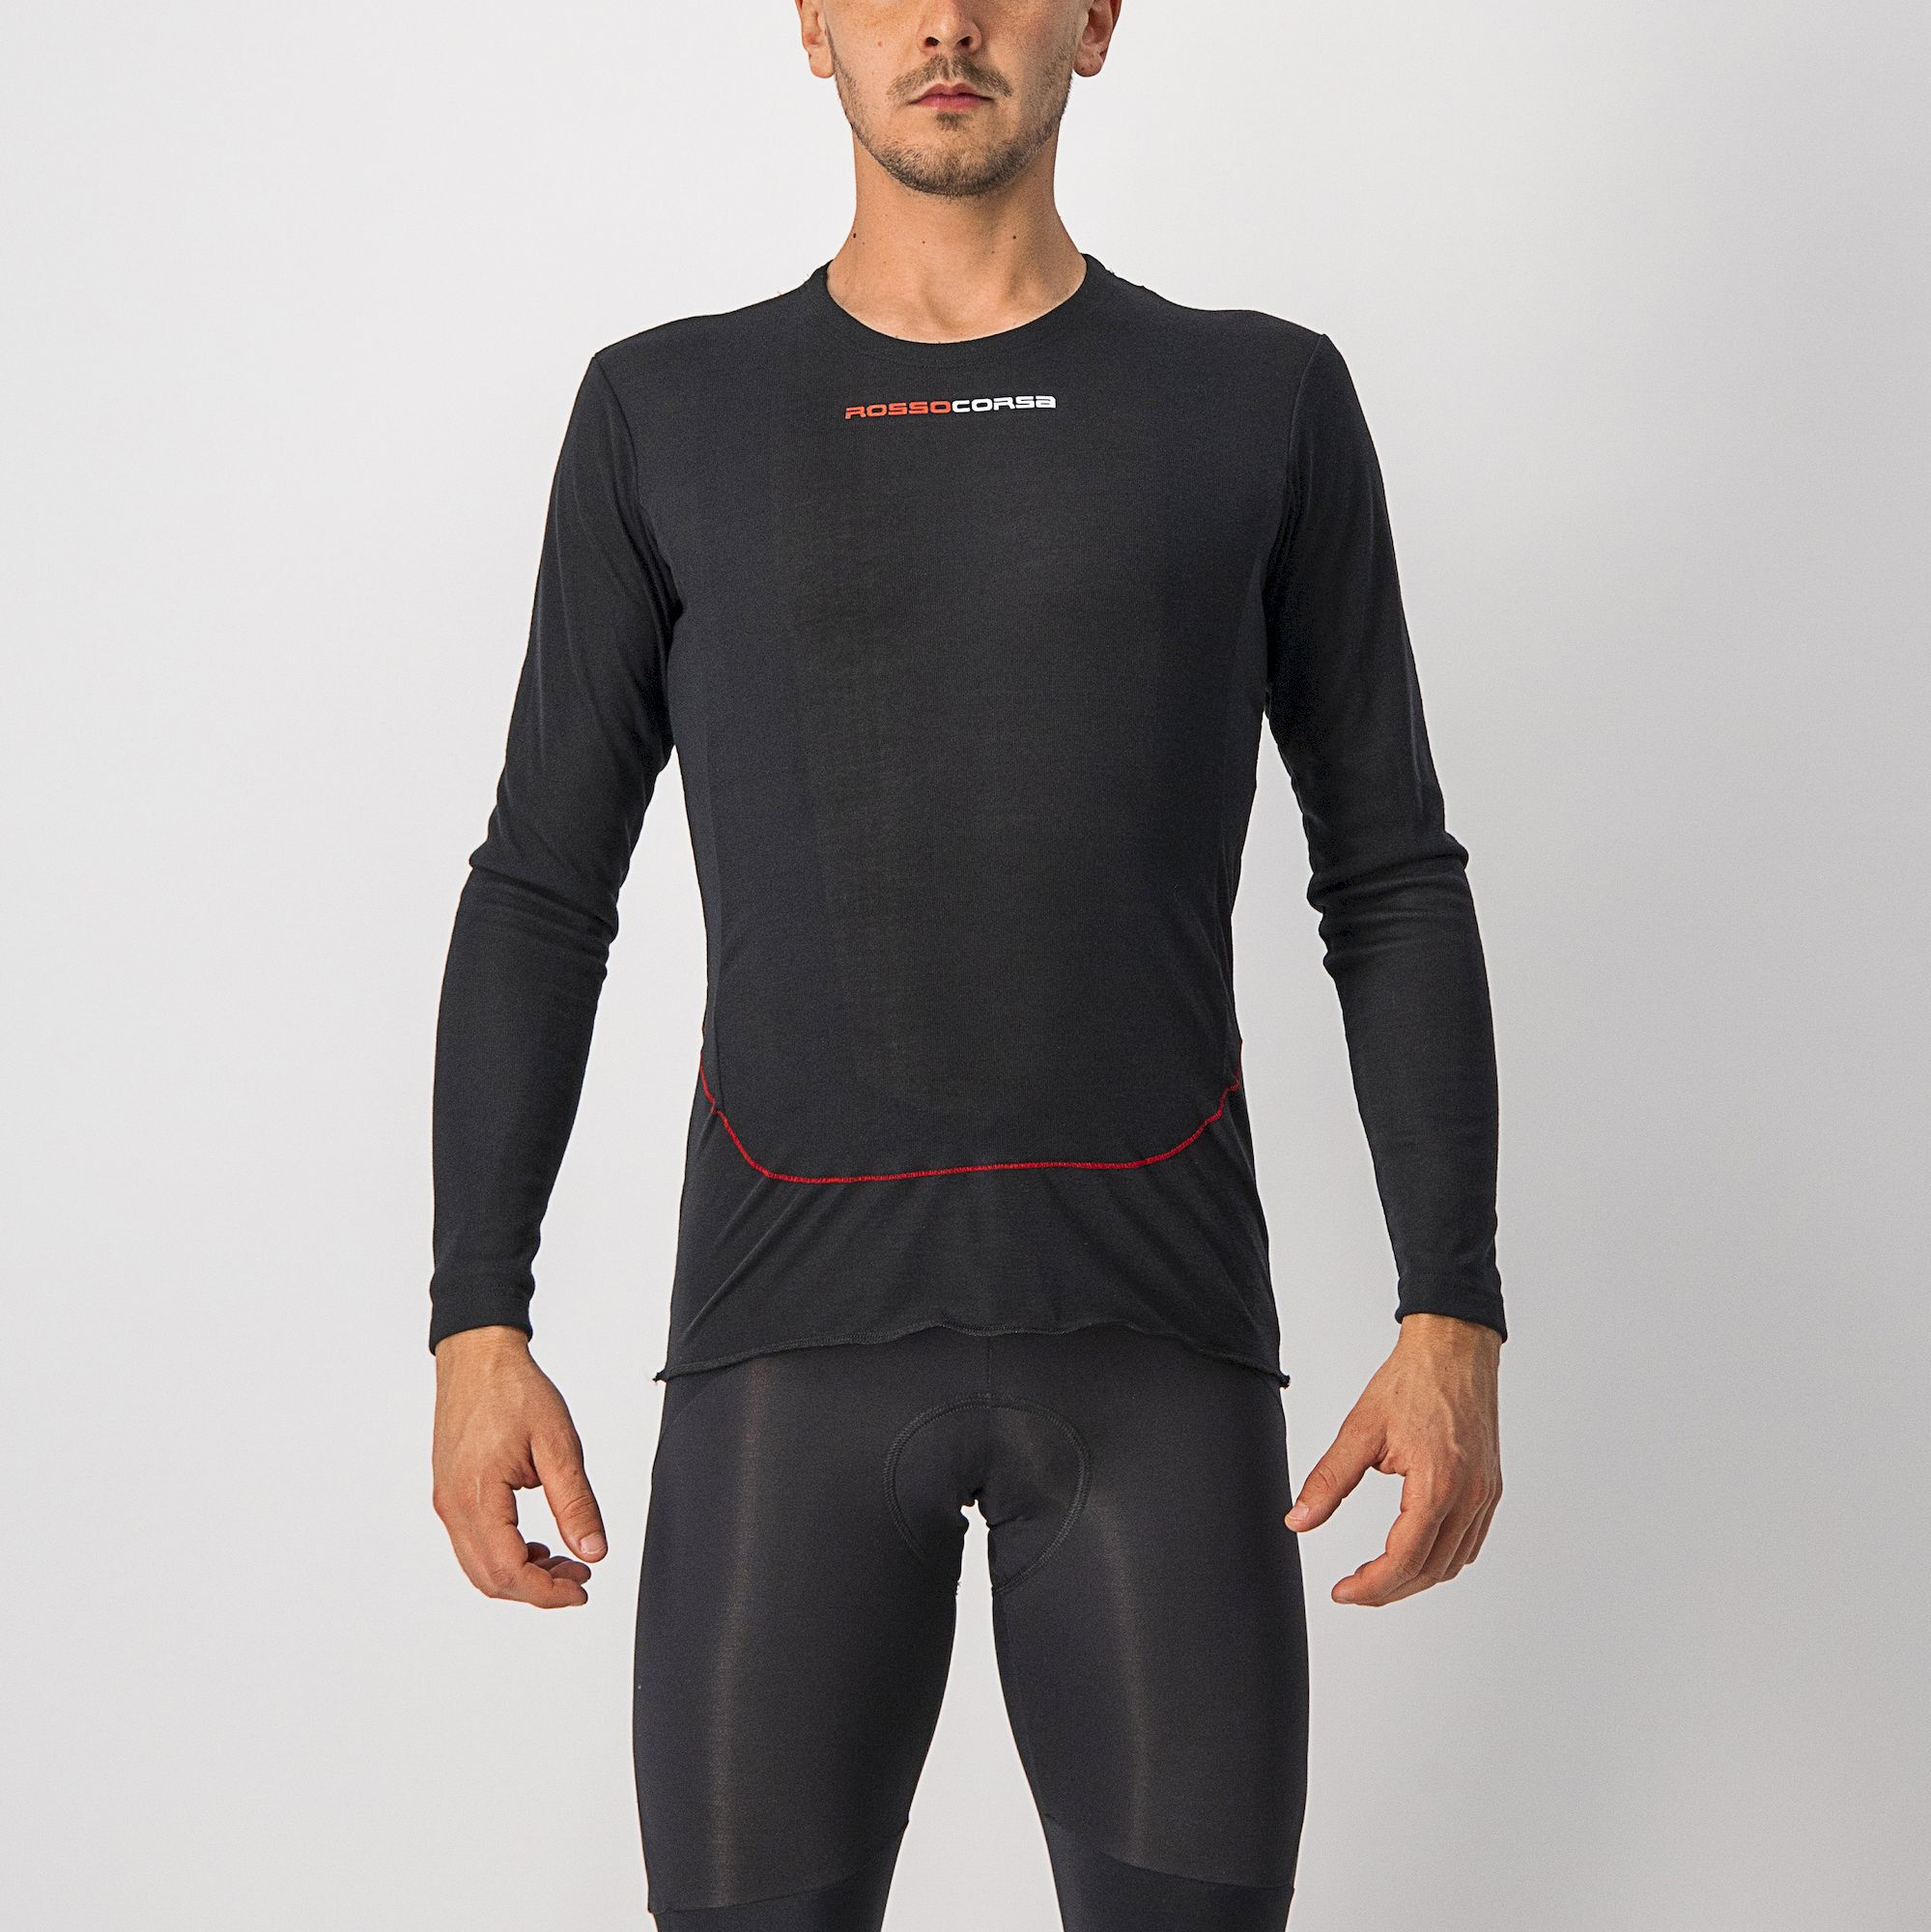 Castelli Prosecco Tech Long Sleeve - Cycling technical base layers | Hardloop